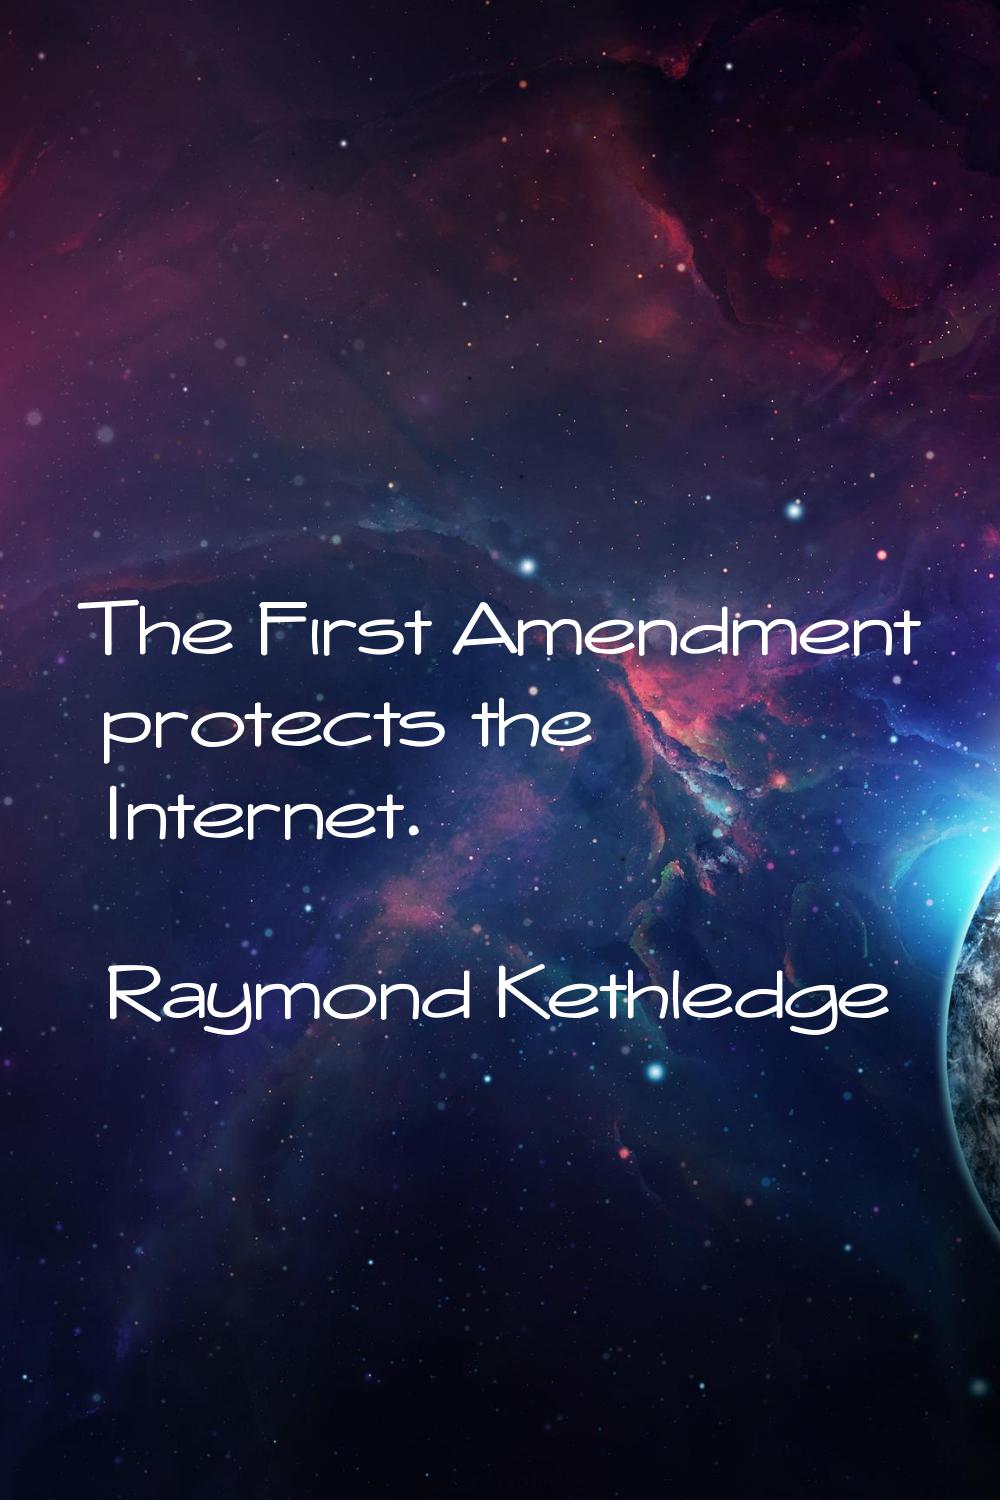 The First Amendment protects the Internet.